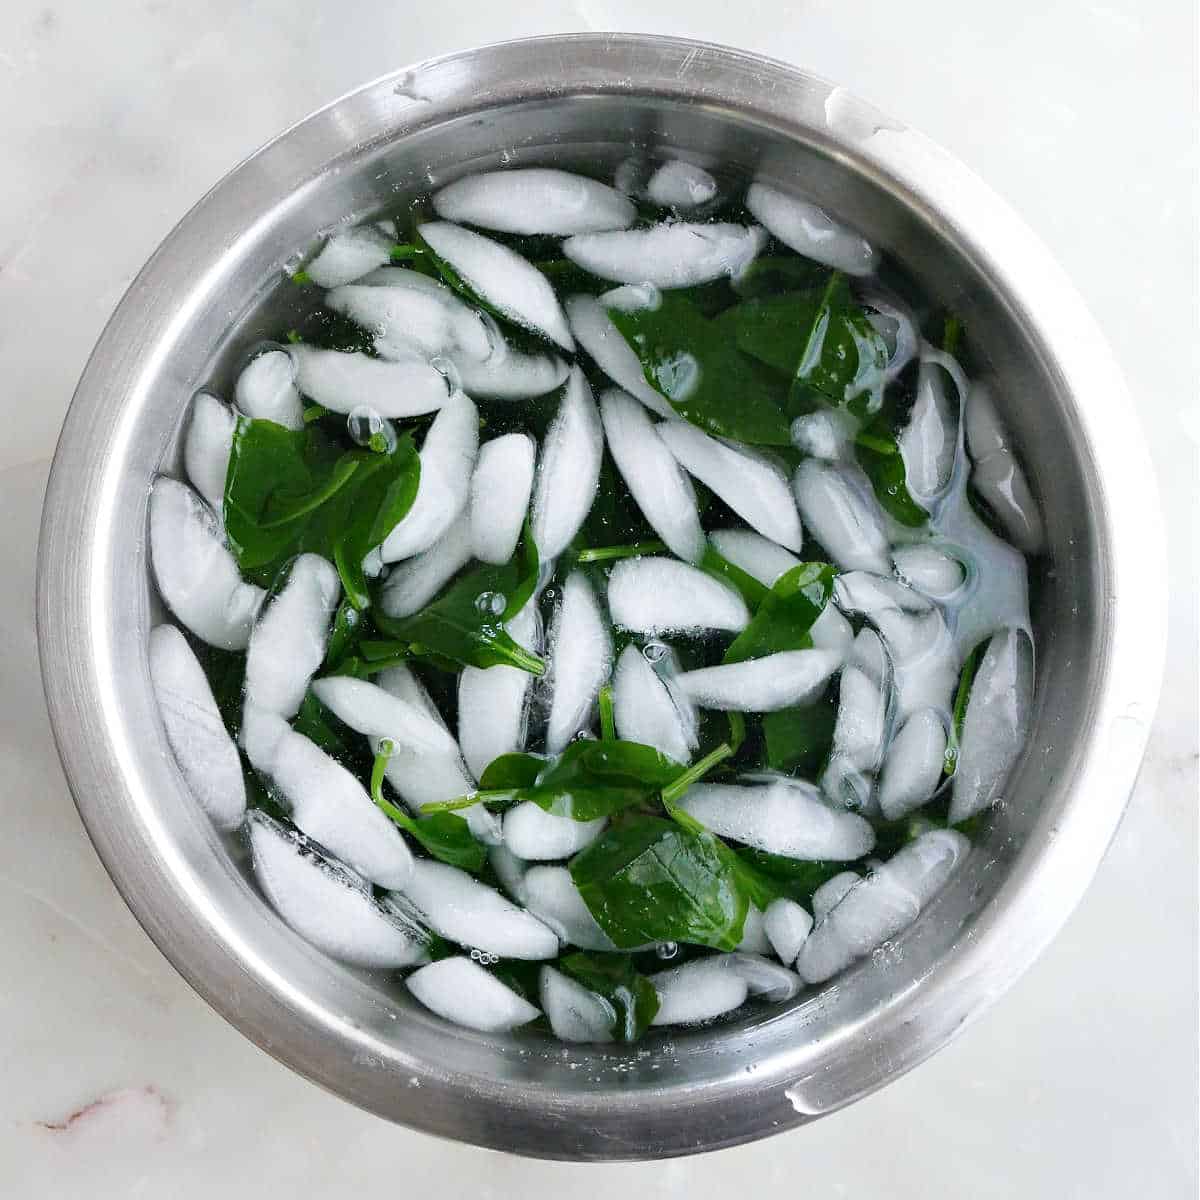 Cooked spinach in an ice bath in a stainless steel mixing bowl.